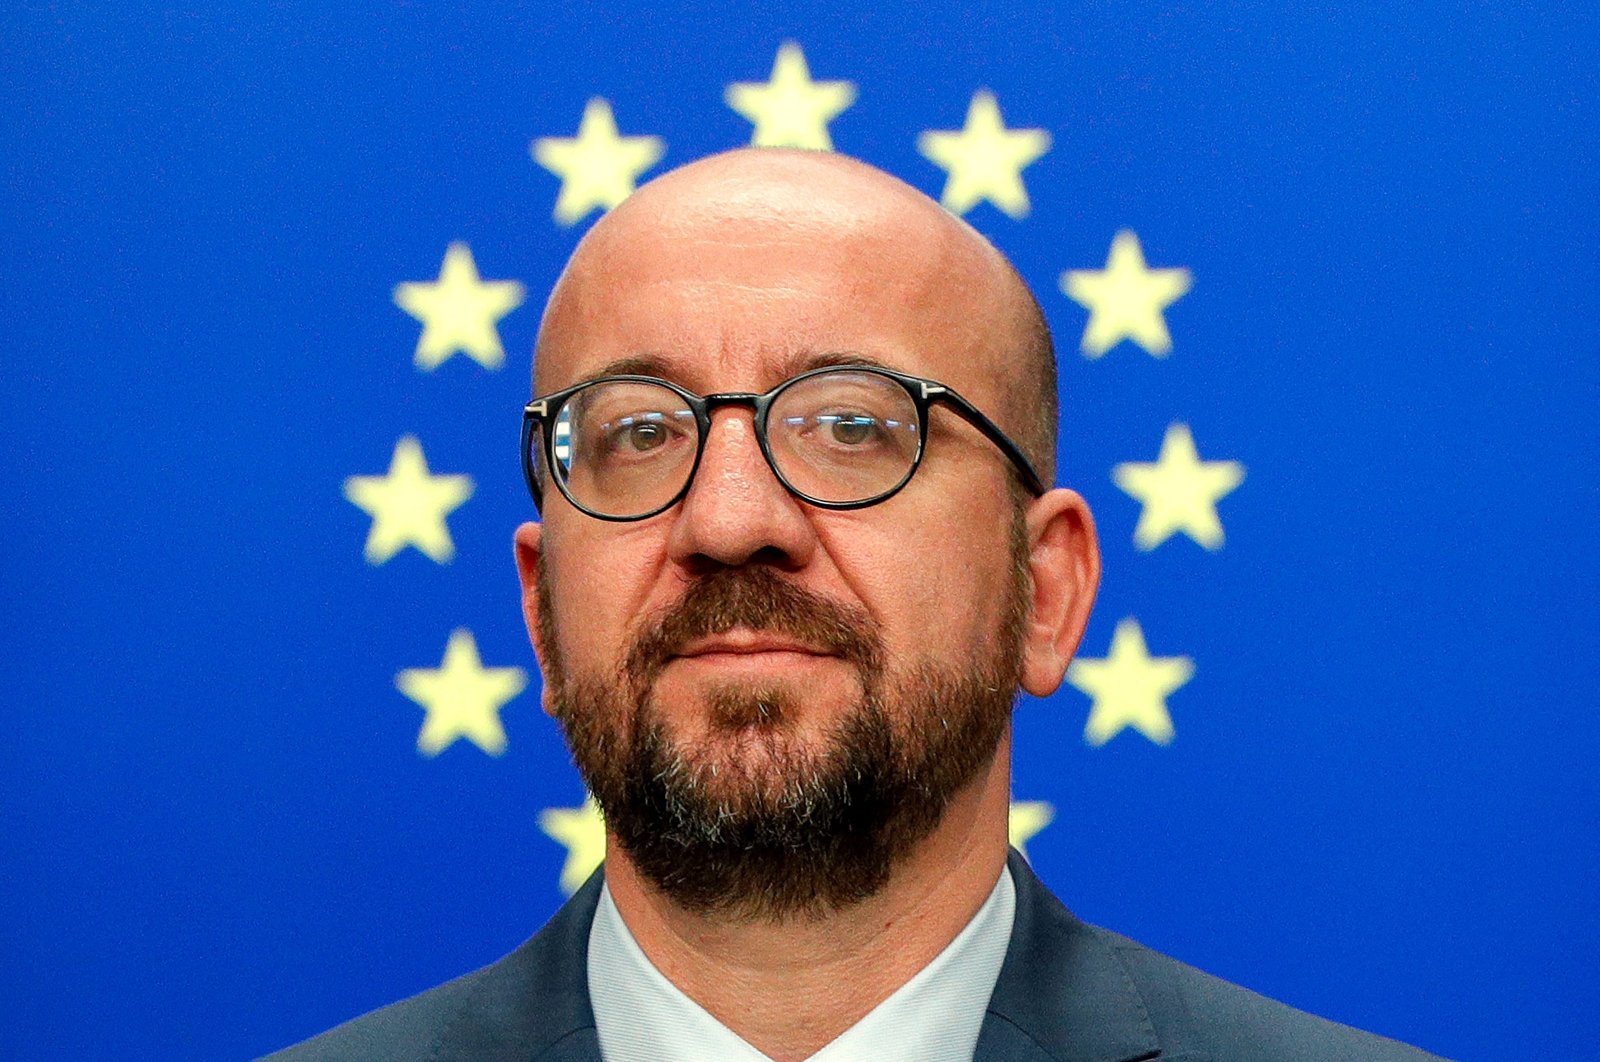 Belgium&#039;s then-Prime Minister Charles Michel looks on as he addresses the media after the EU leaders struck a deal on the bloc&#039;s top jobs during the third day of an EU summit, in Brussels on July 2, 2019. (AFP File Photo)